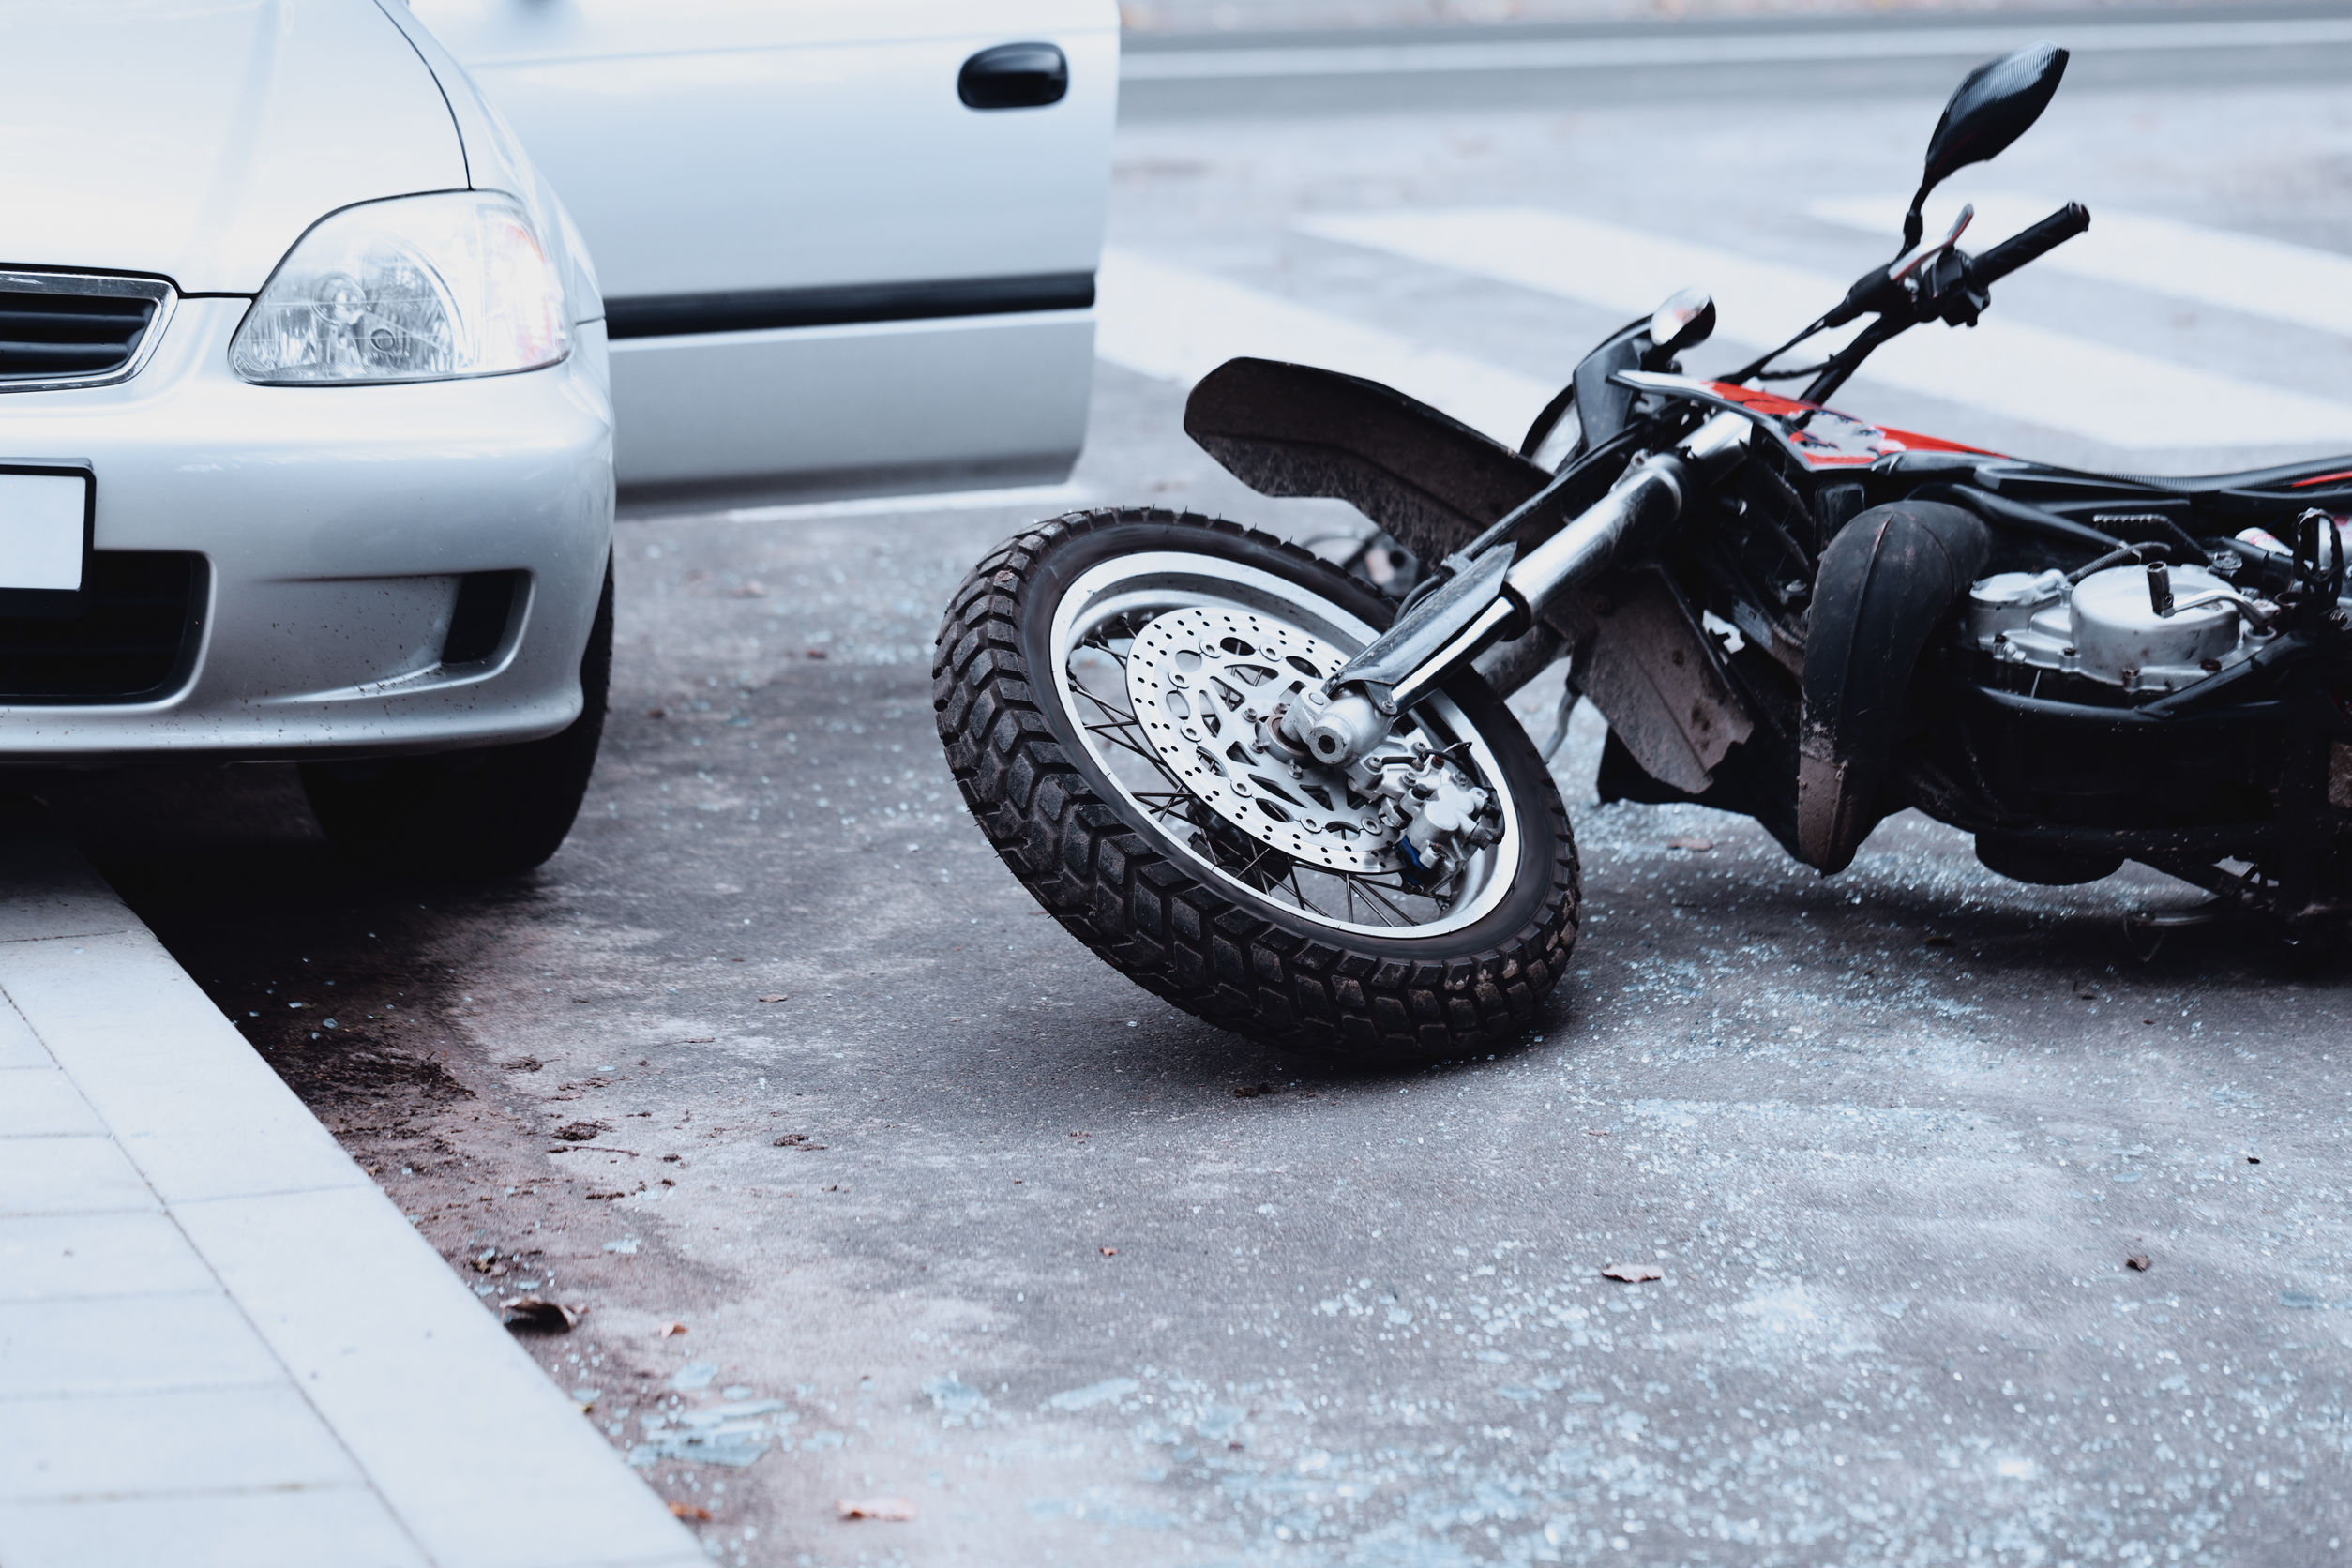 Minnesota Motorcycle Accidents Spike During The Spring - Hey Workers